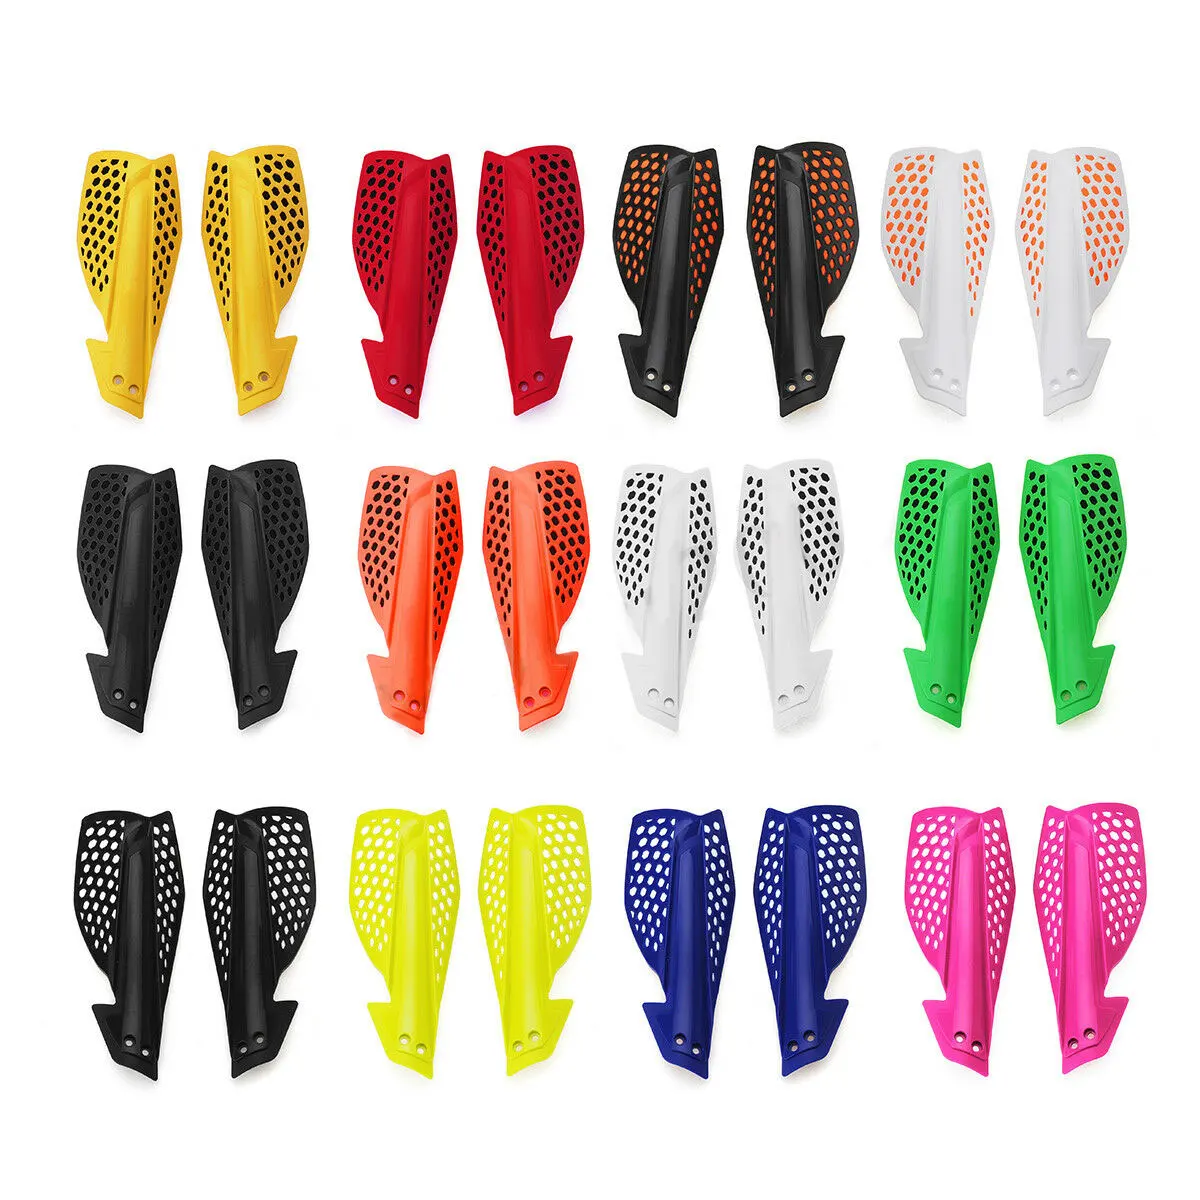 

Modified Hand Guard Modified Handlebar Handguard Eye-Catching Modified Handguard Turn Signal Light Levers Various Colors